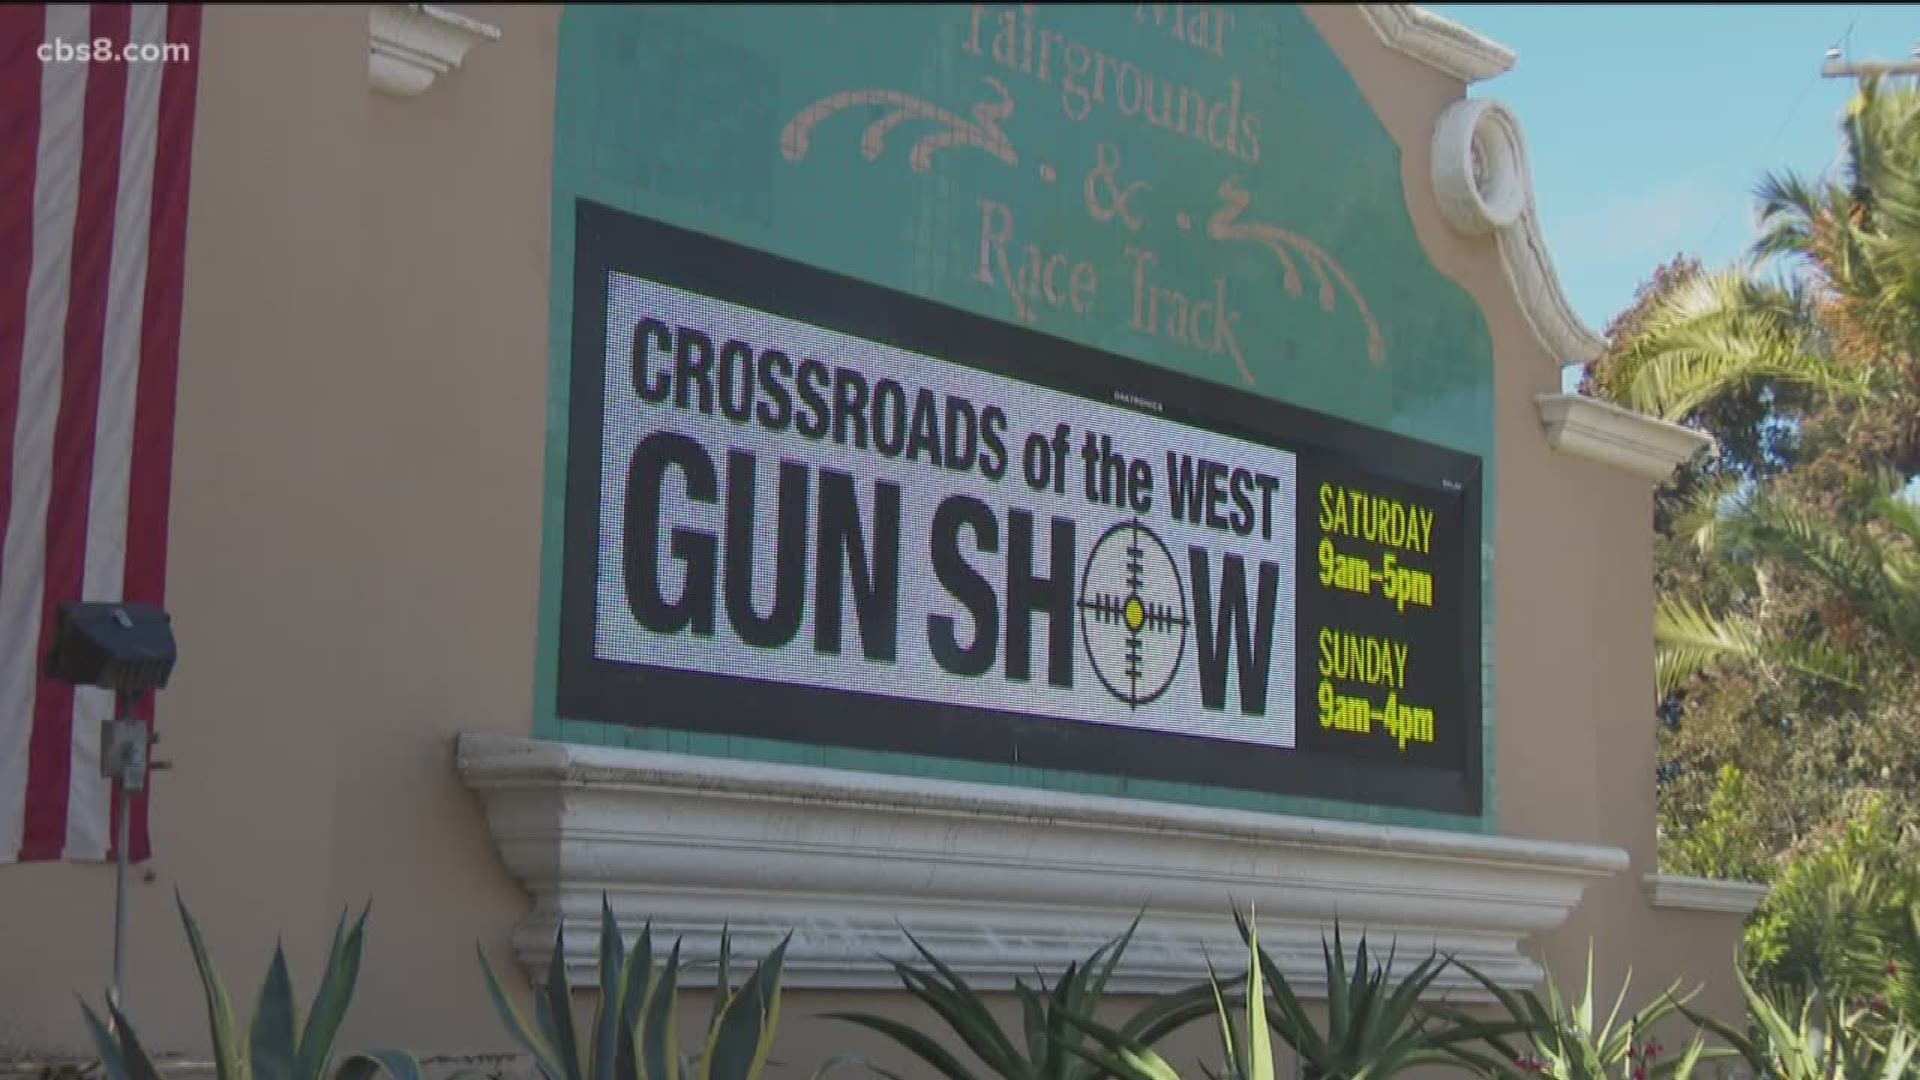 The fall and winter events were added after a federal judge temporarily blocked a moratorium on gun shows at a Southern California fairground in June.